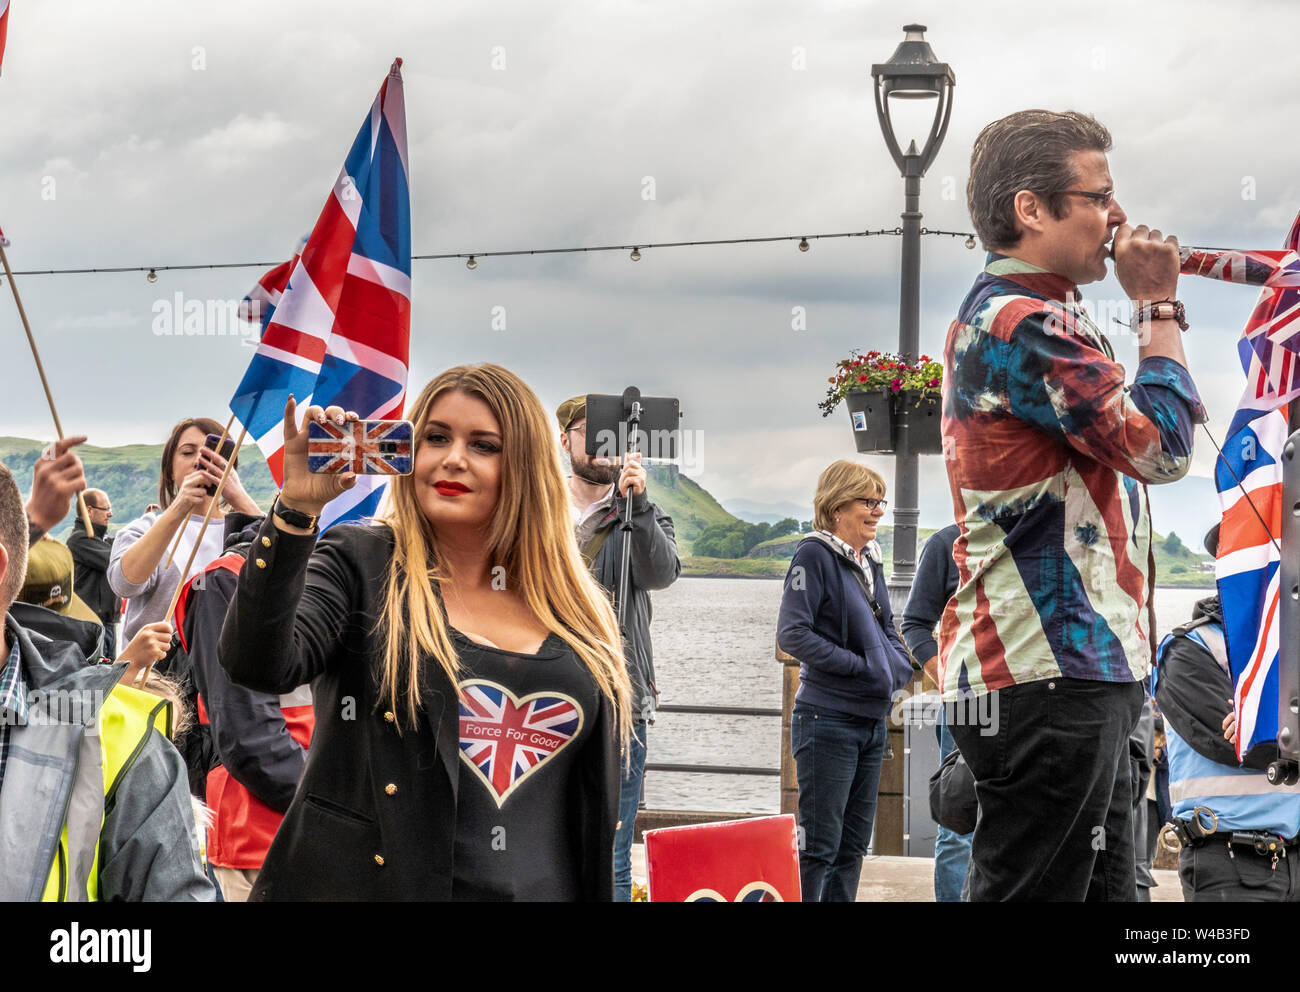 Oban, All Under One Banner independence march - 2019 Stock Photo